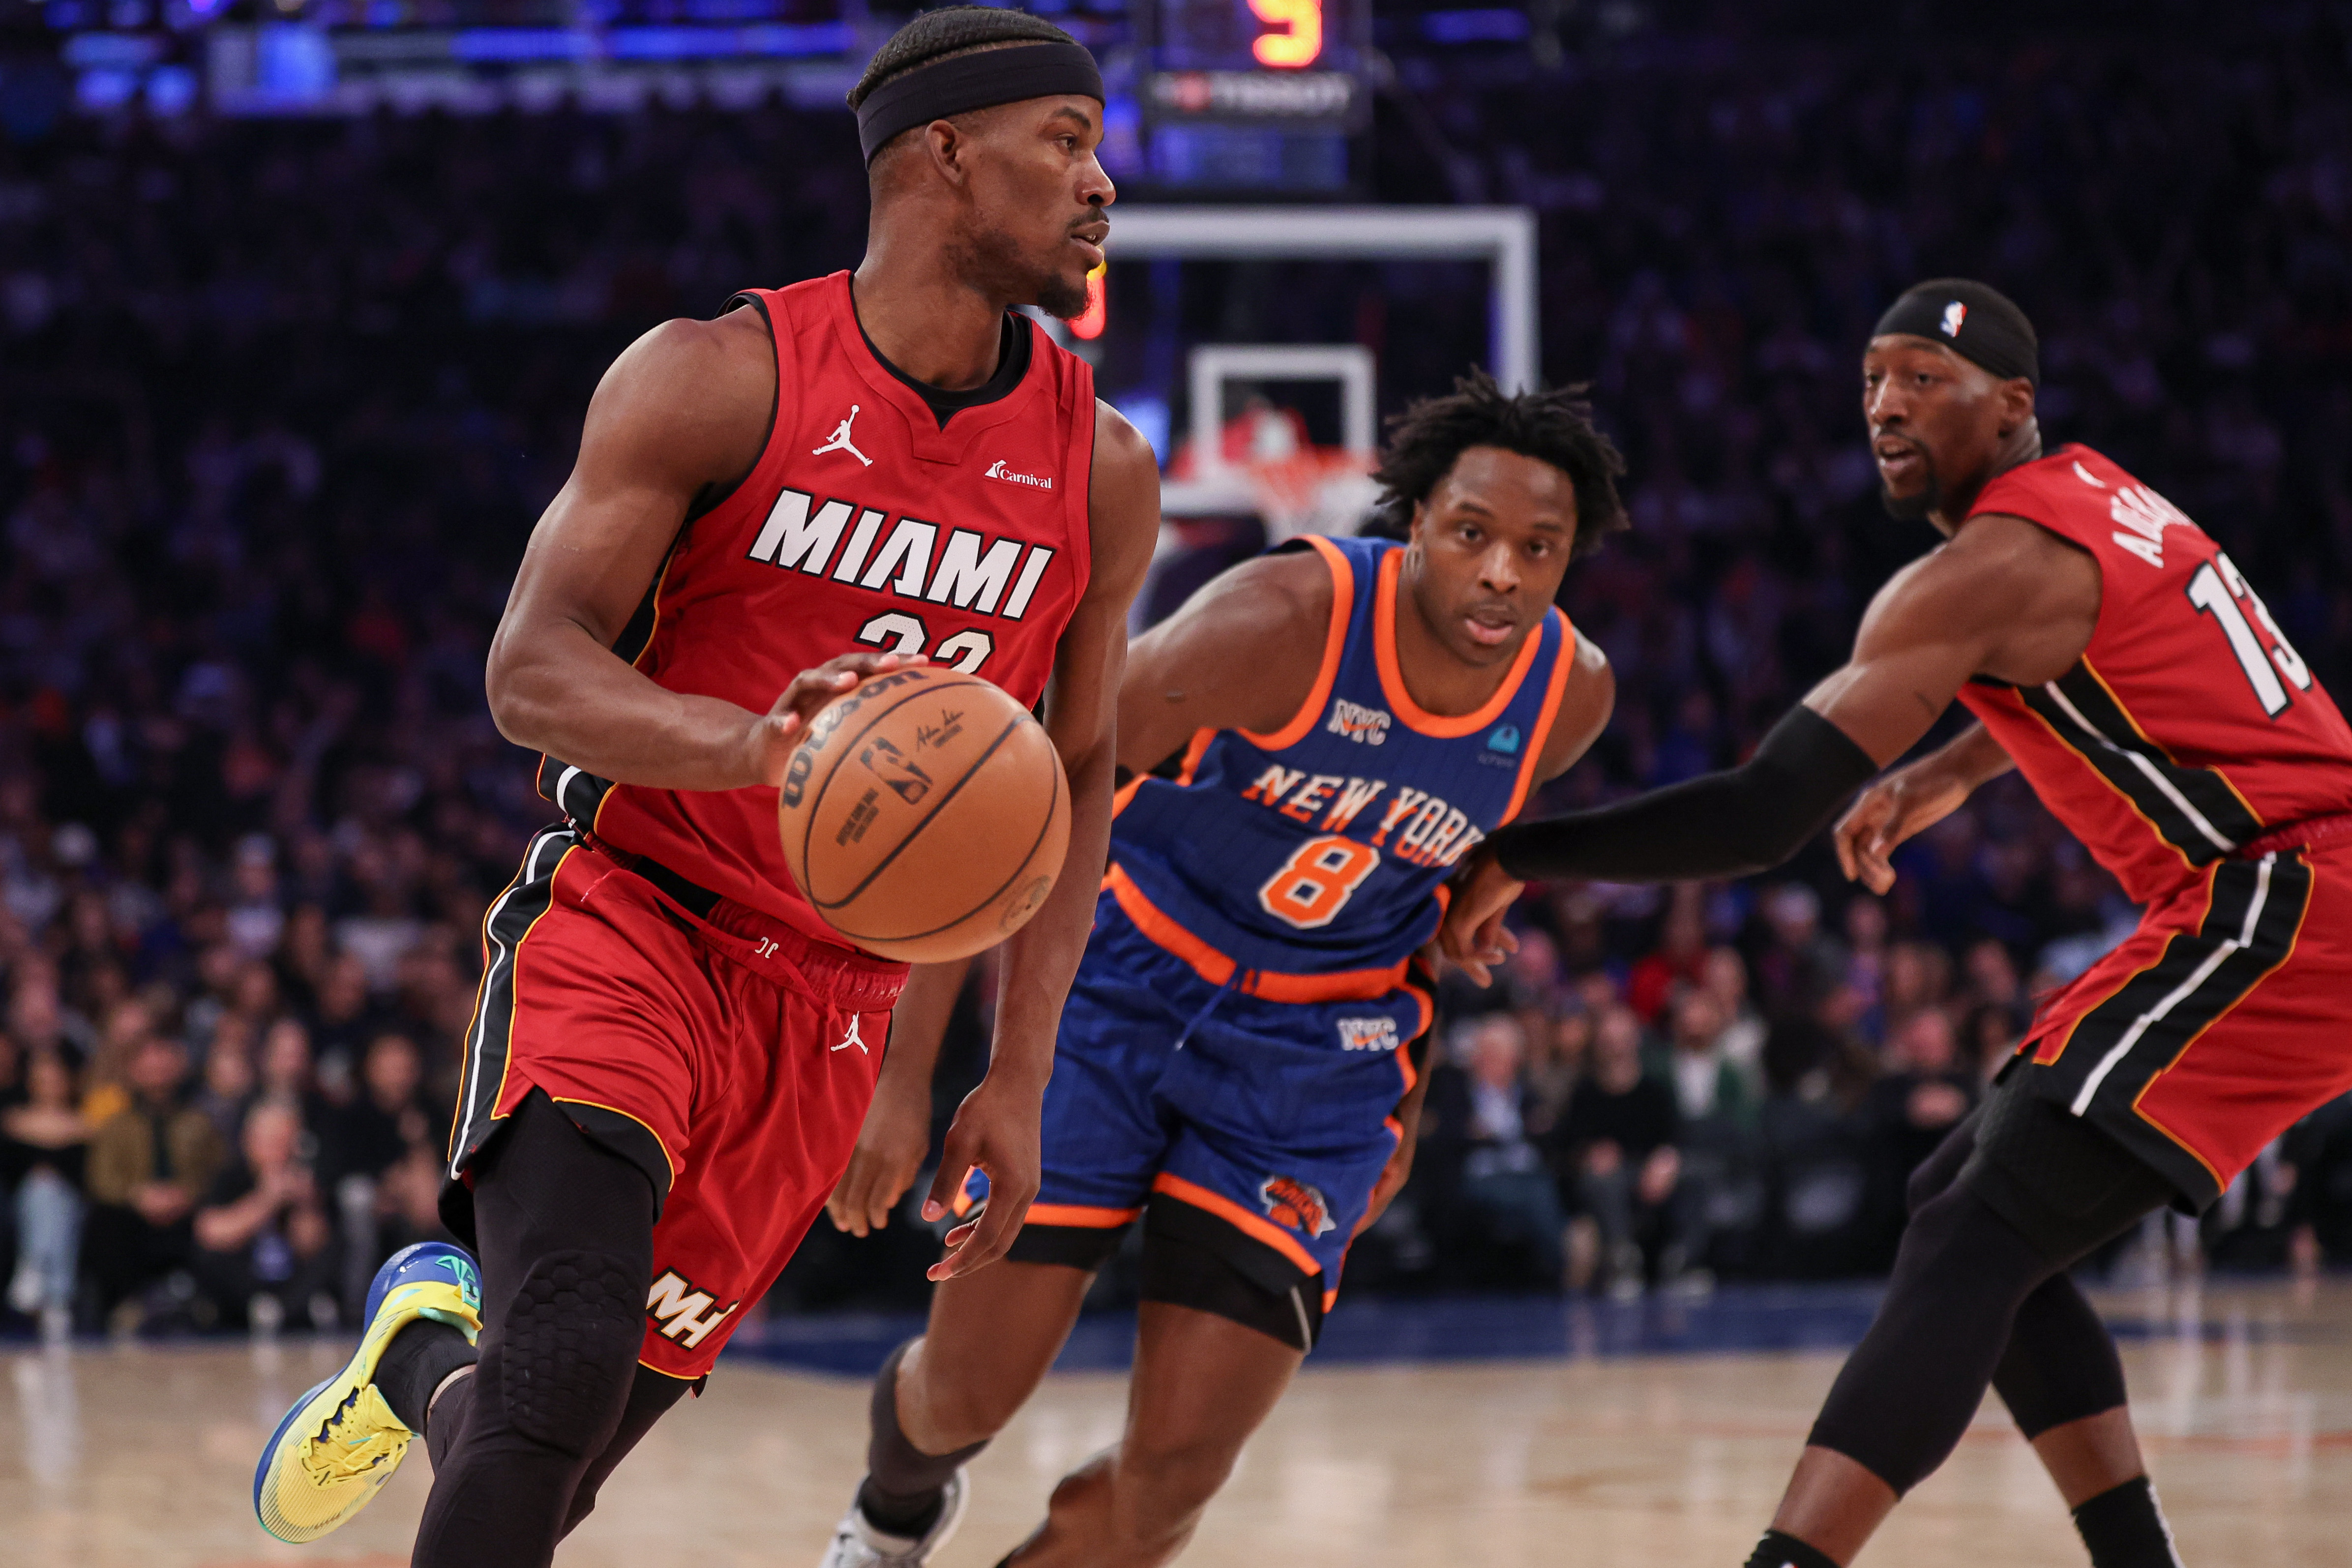 Jan 27, 2024; New York, New York, USA; Miami Heat forward Jimmy Butler (22) dribbles in front of New York Knicks forward OG Anunoby (8) and guard Evan Fournier (13) during the first half at Madison Square Garden. Mandatory Credit: Vincent Carchietta-USA TODAY Sports